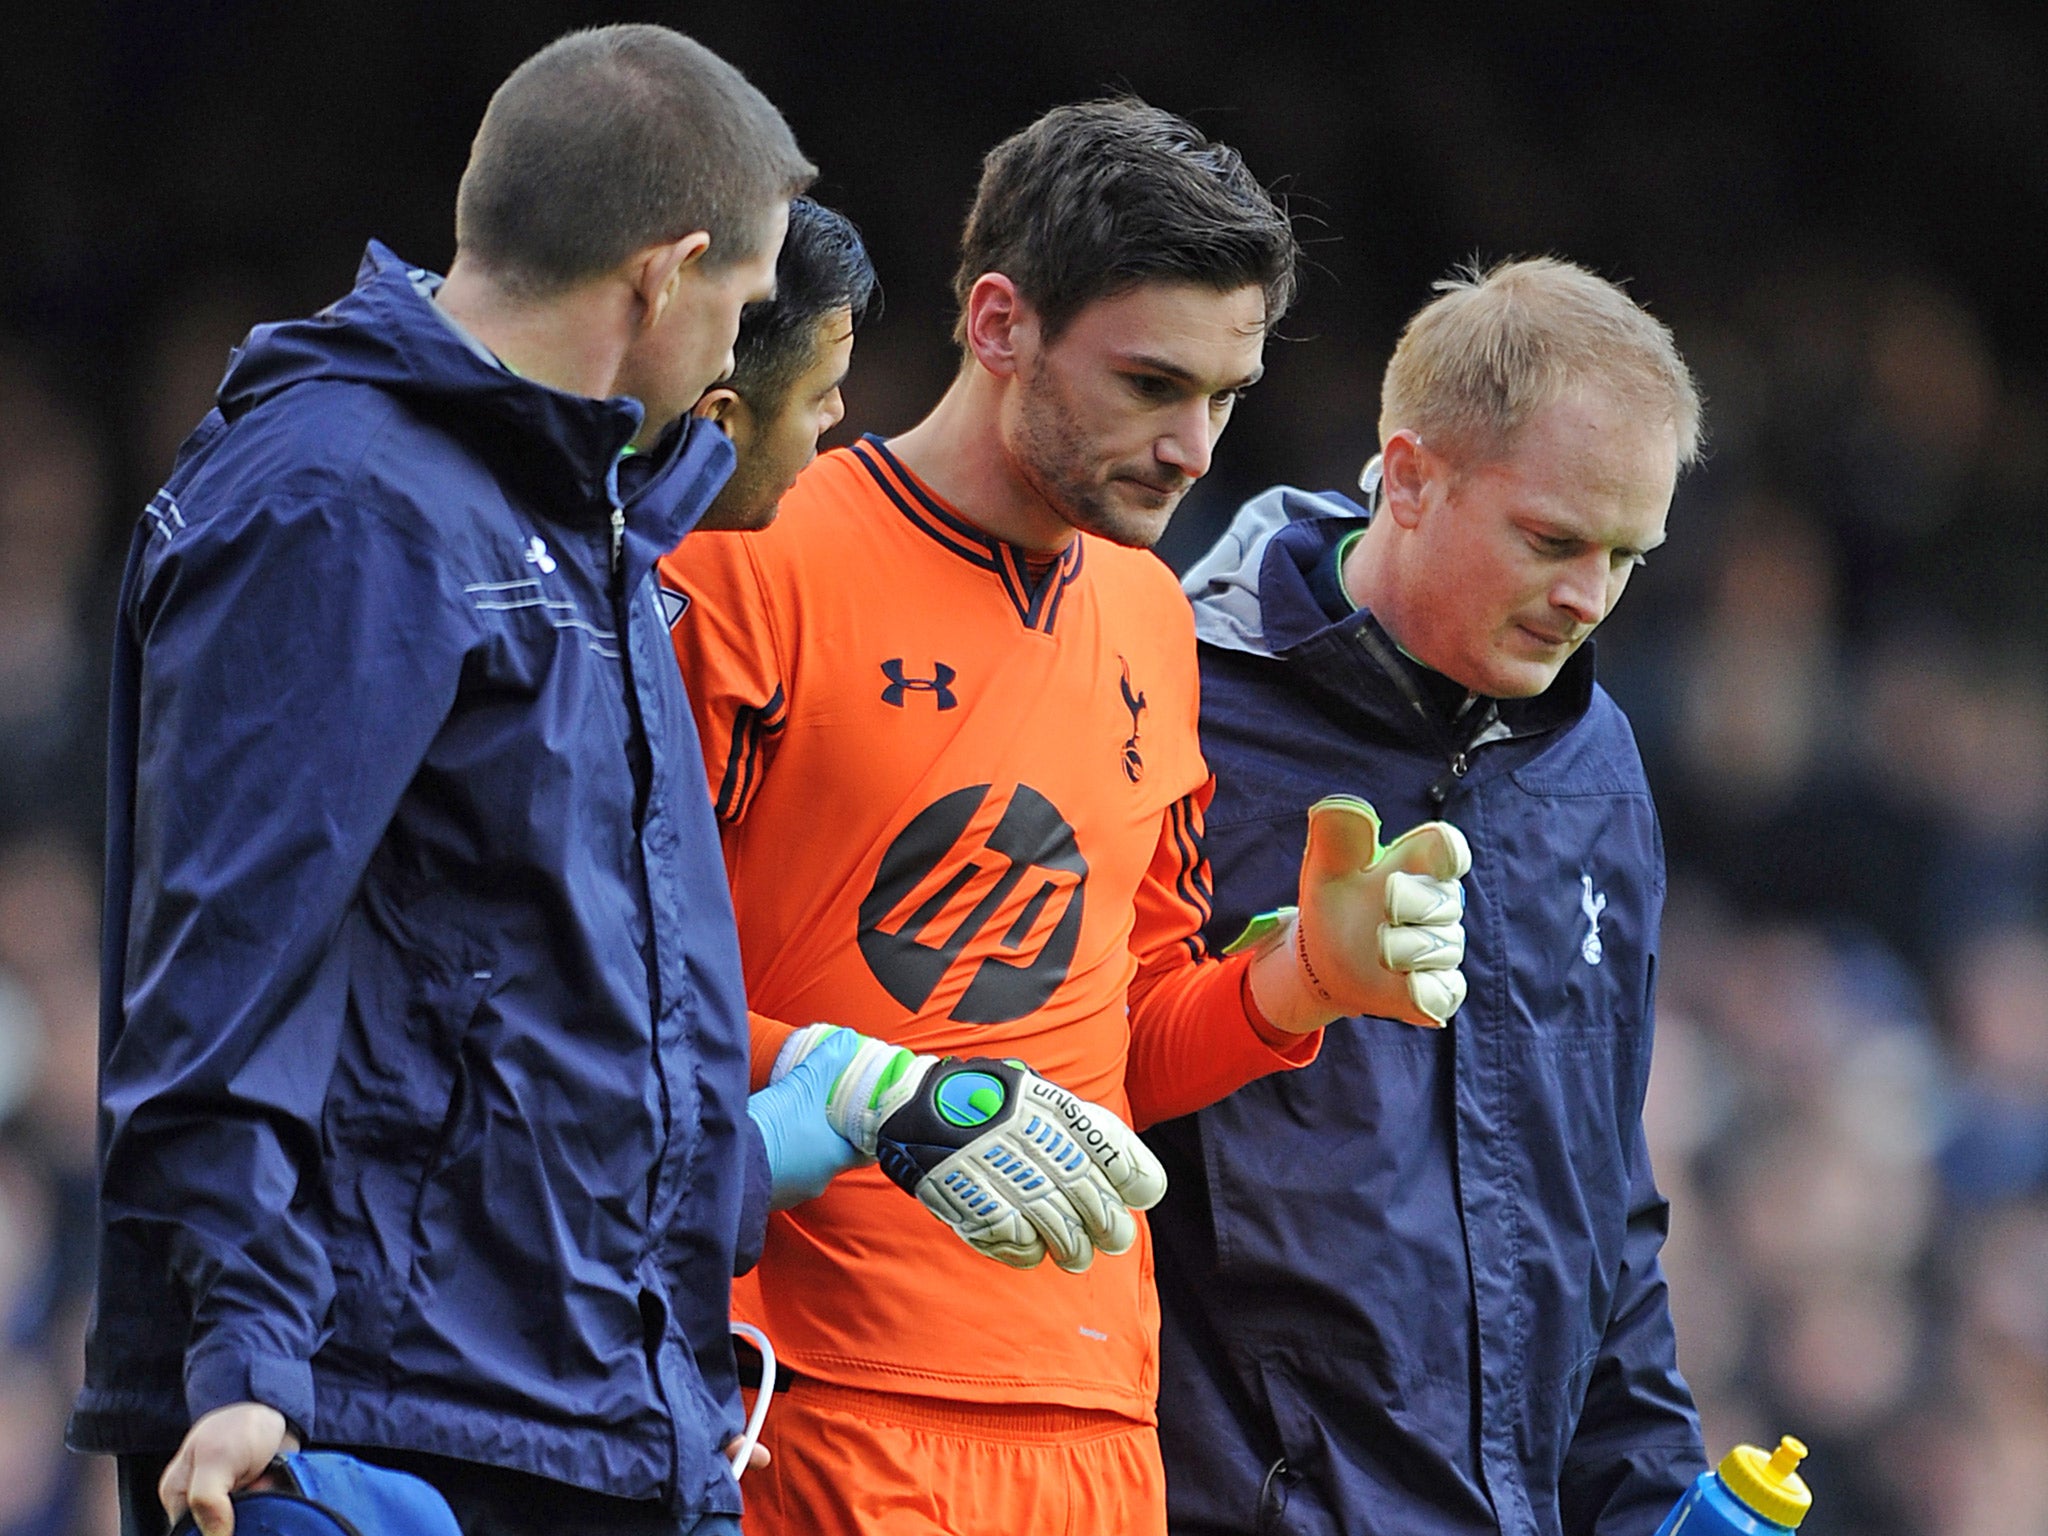 Tottenham goalkeeper Hugo Lloris was allowed to play on despite suffering a concussion in a match against Everton last season